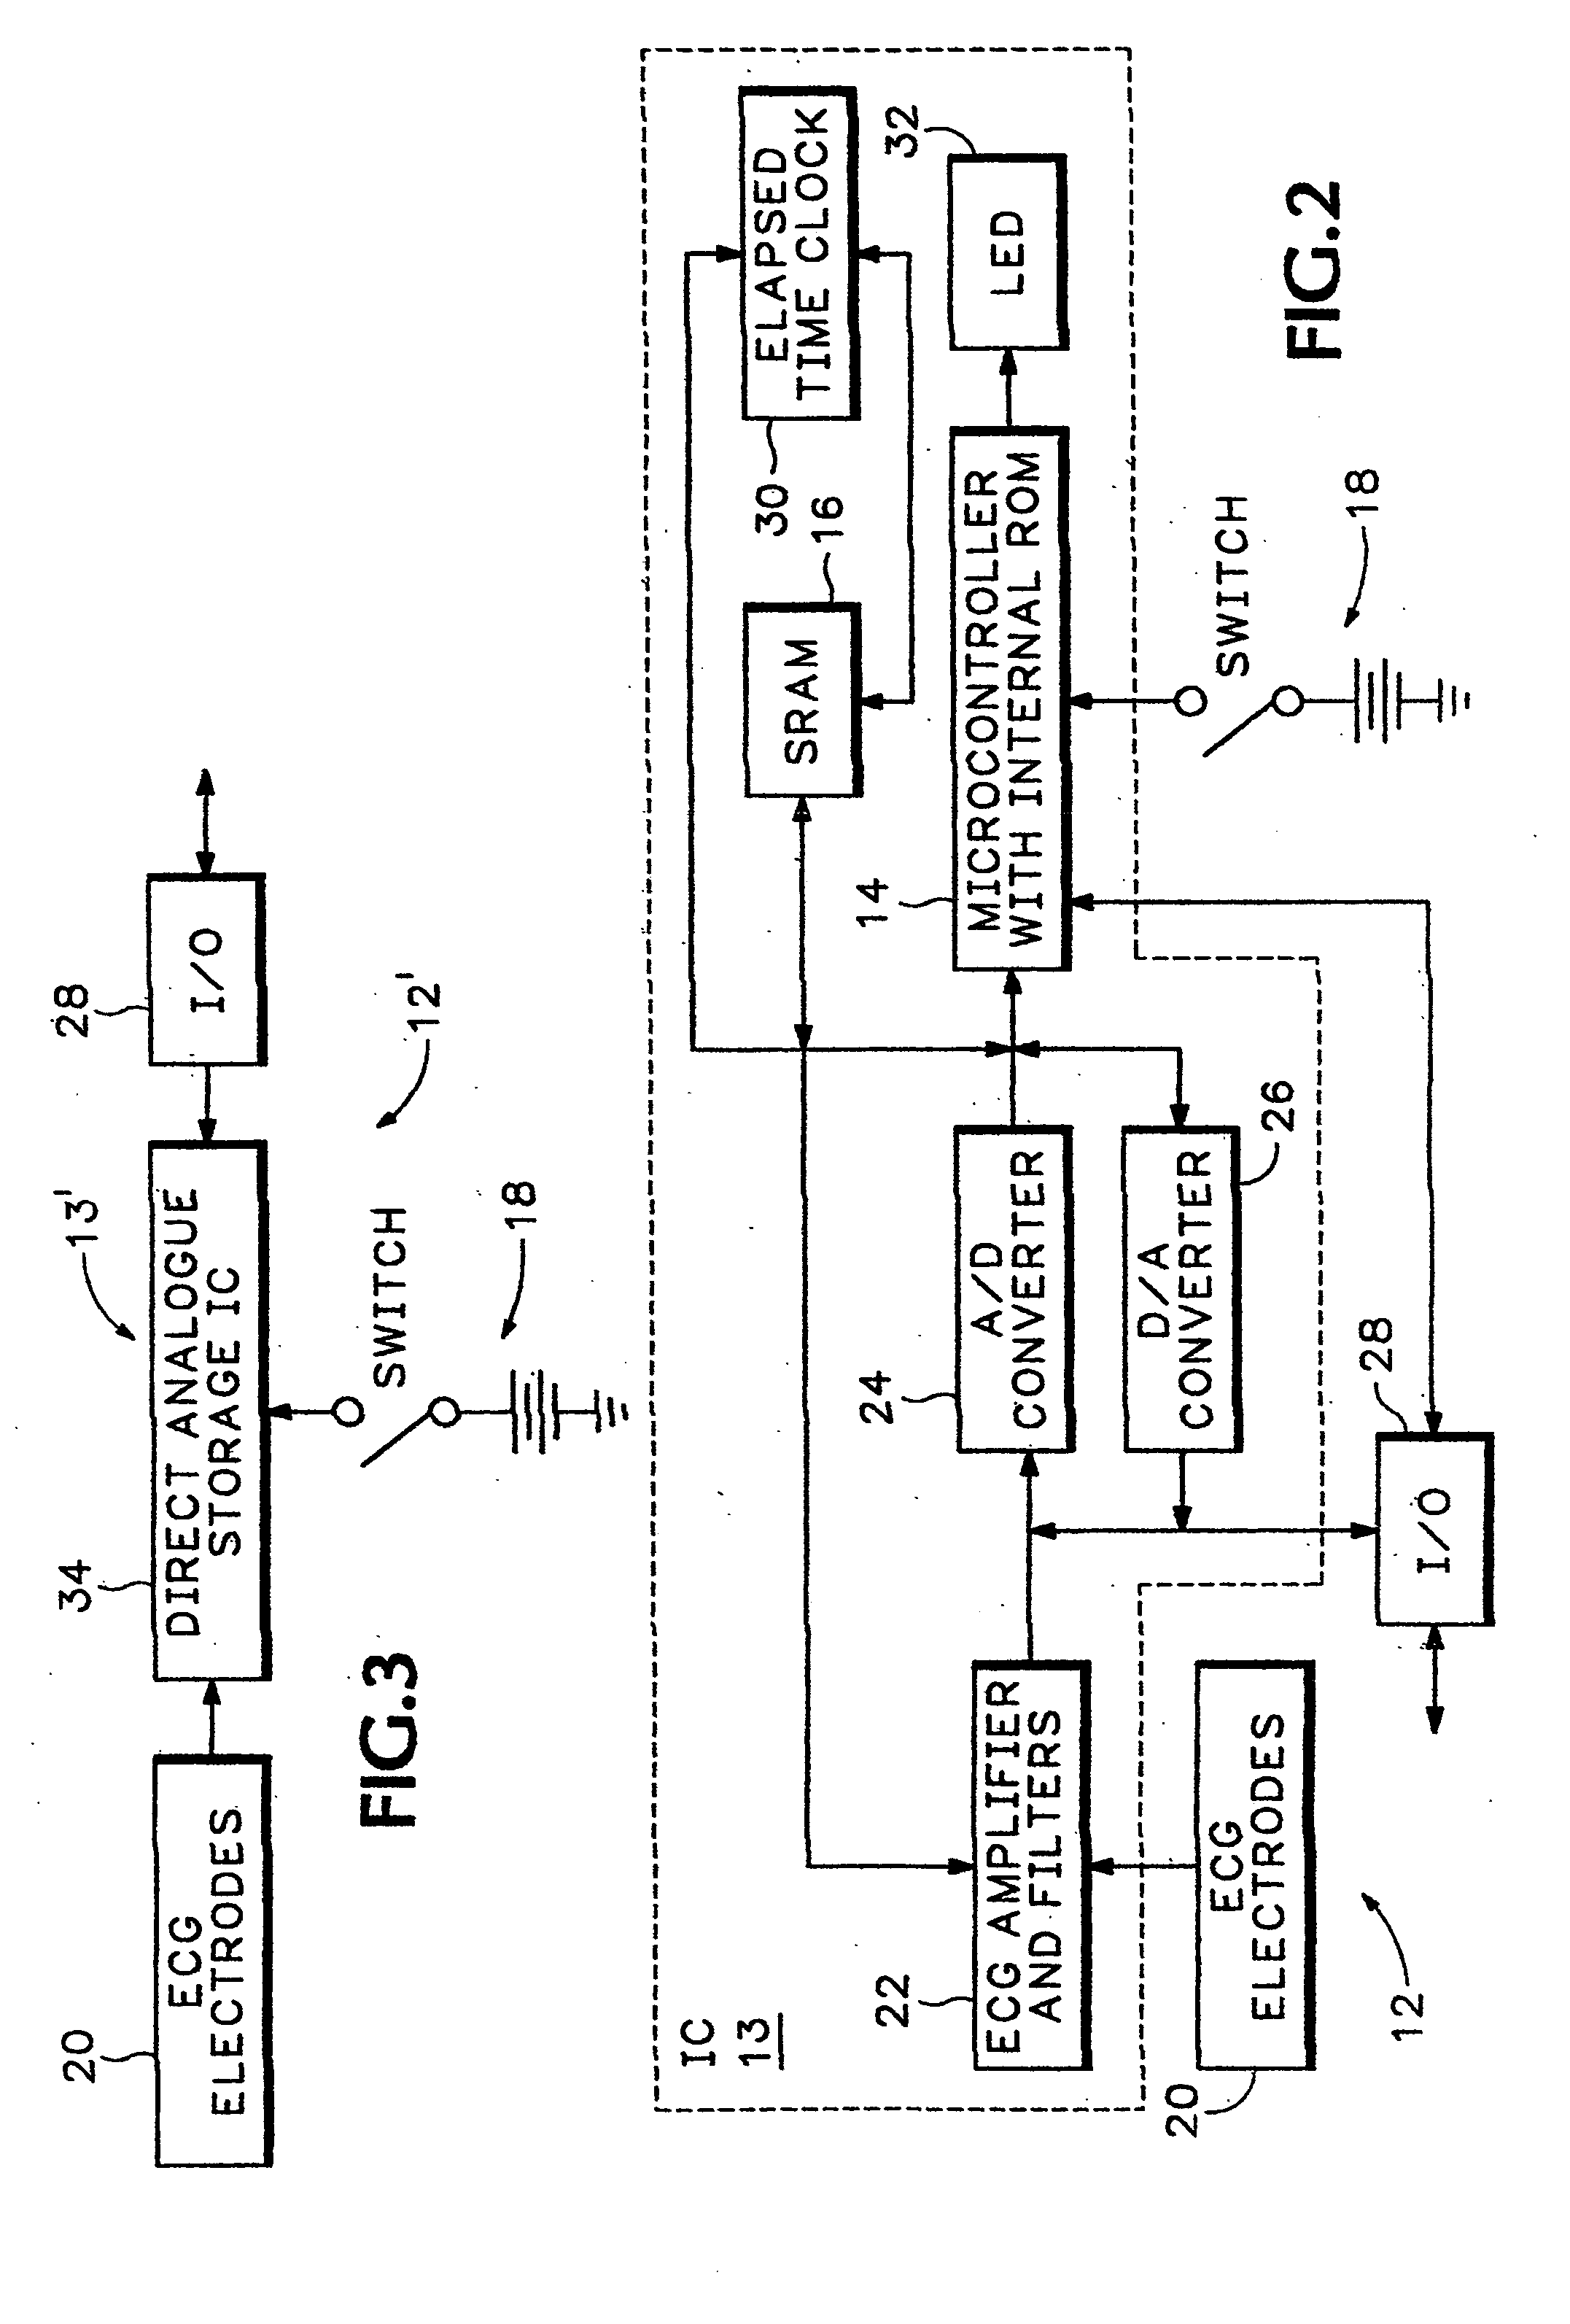 Non-invasive body composition monitor, system and method